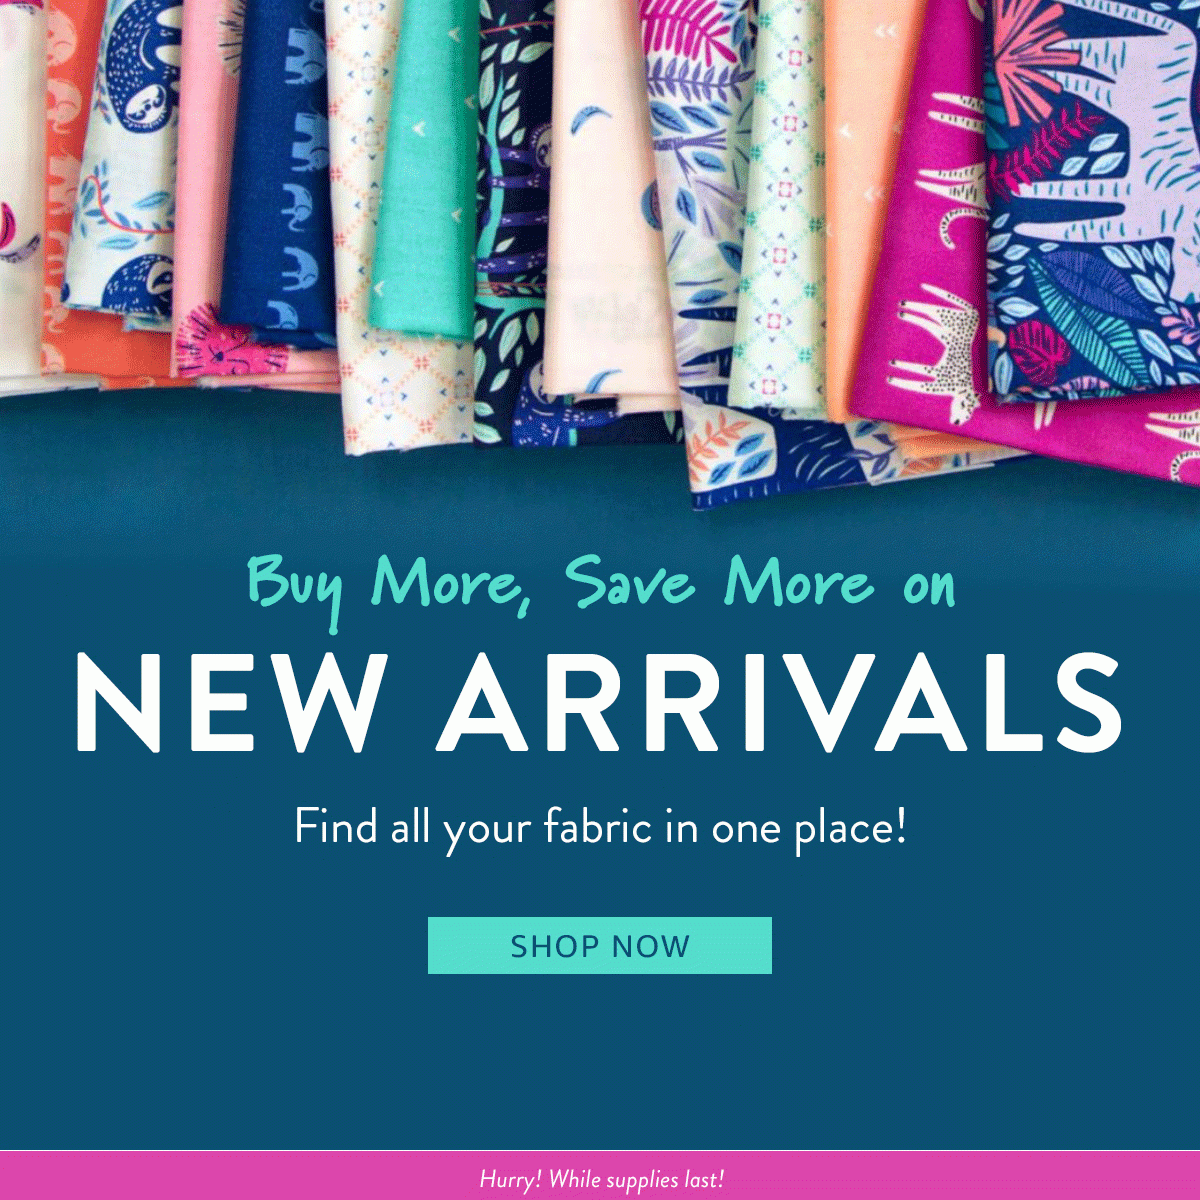 Buy More, Save More on NEW ARRIVALS | SHOP NOW | Hurry! While supplies last!